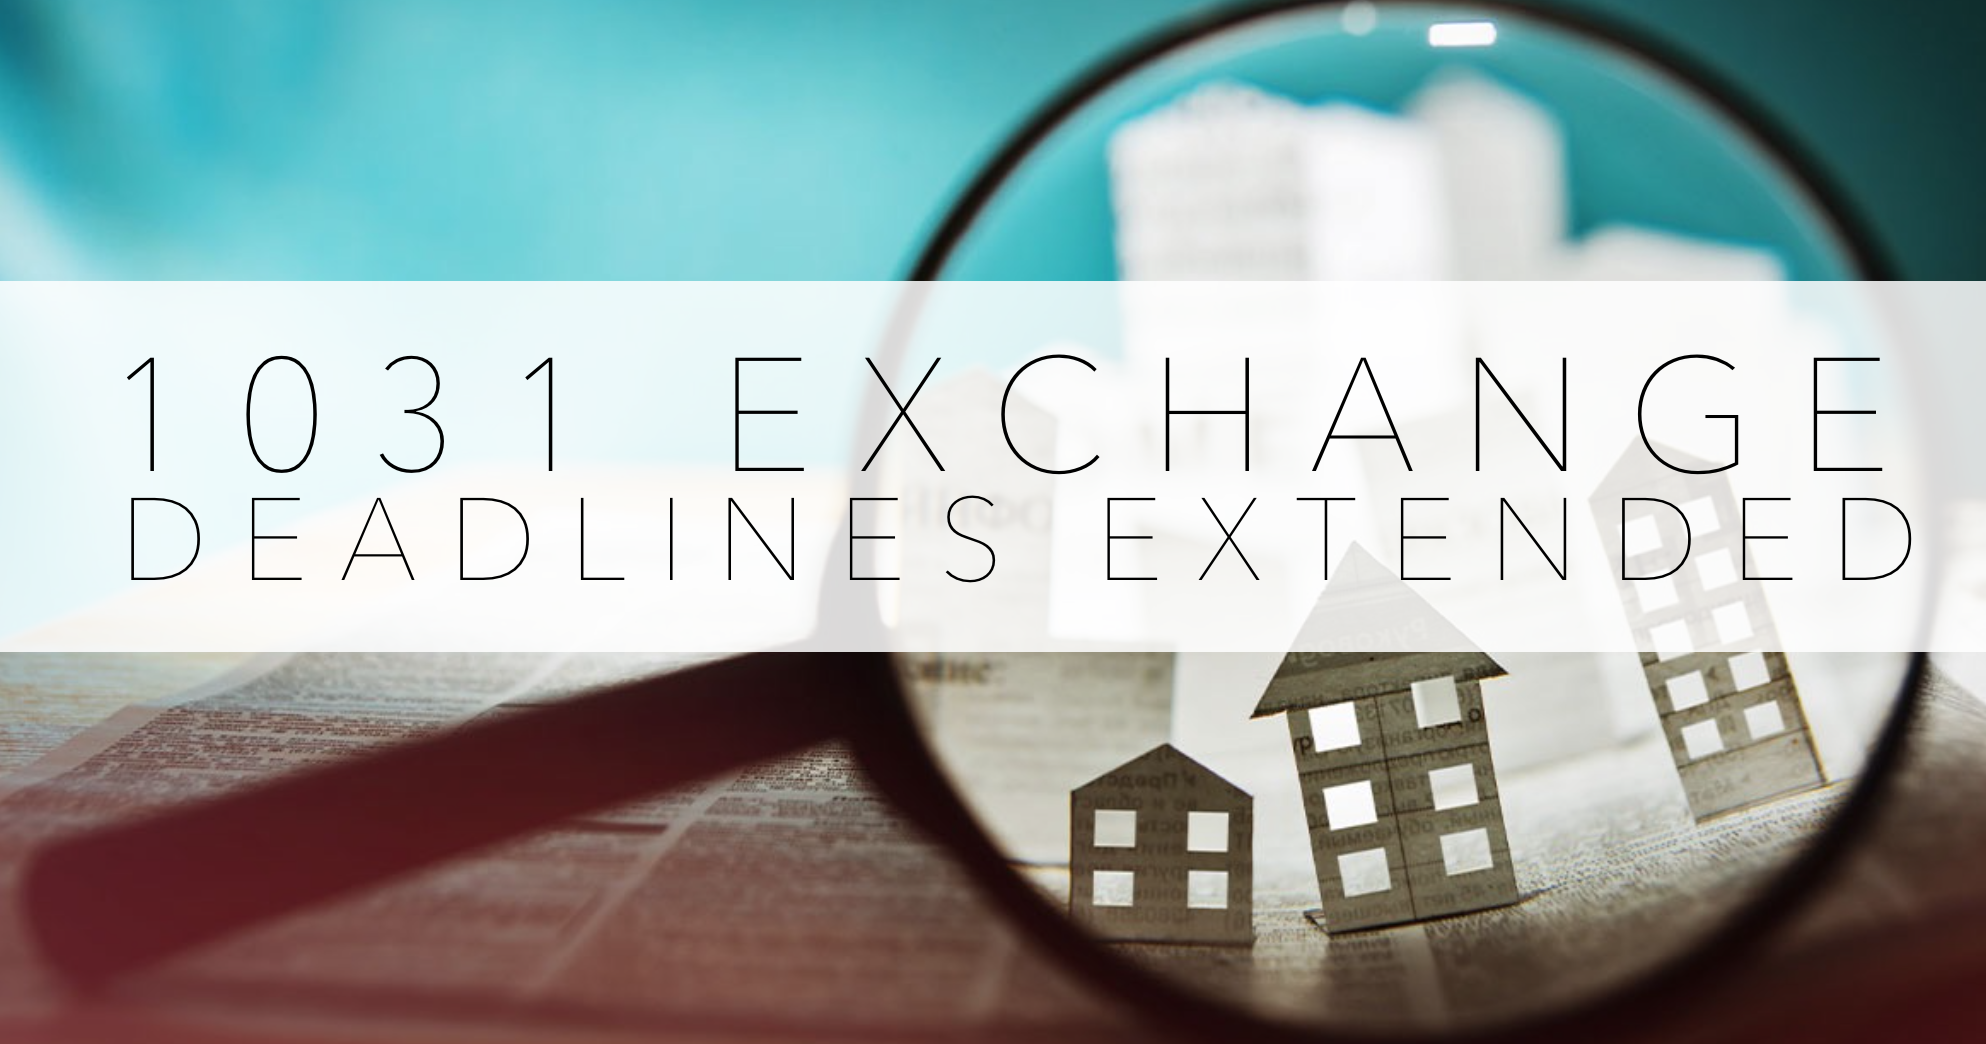 IRS Extends 1031 Exchange Deadlines Amid Covid-19 Crisis